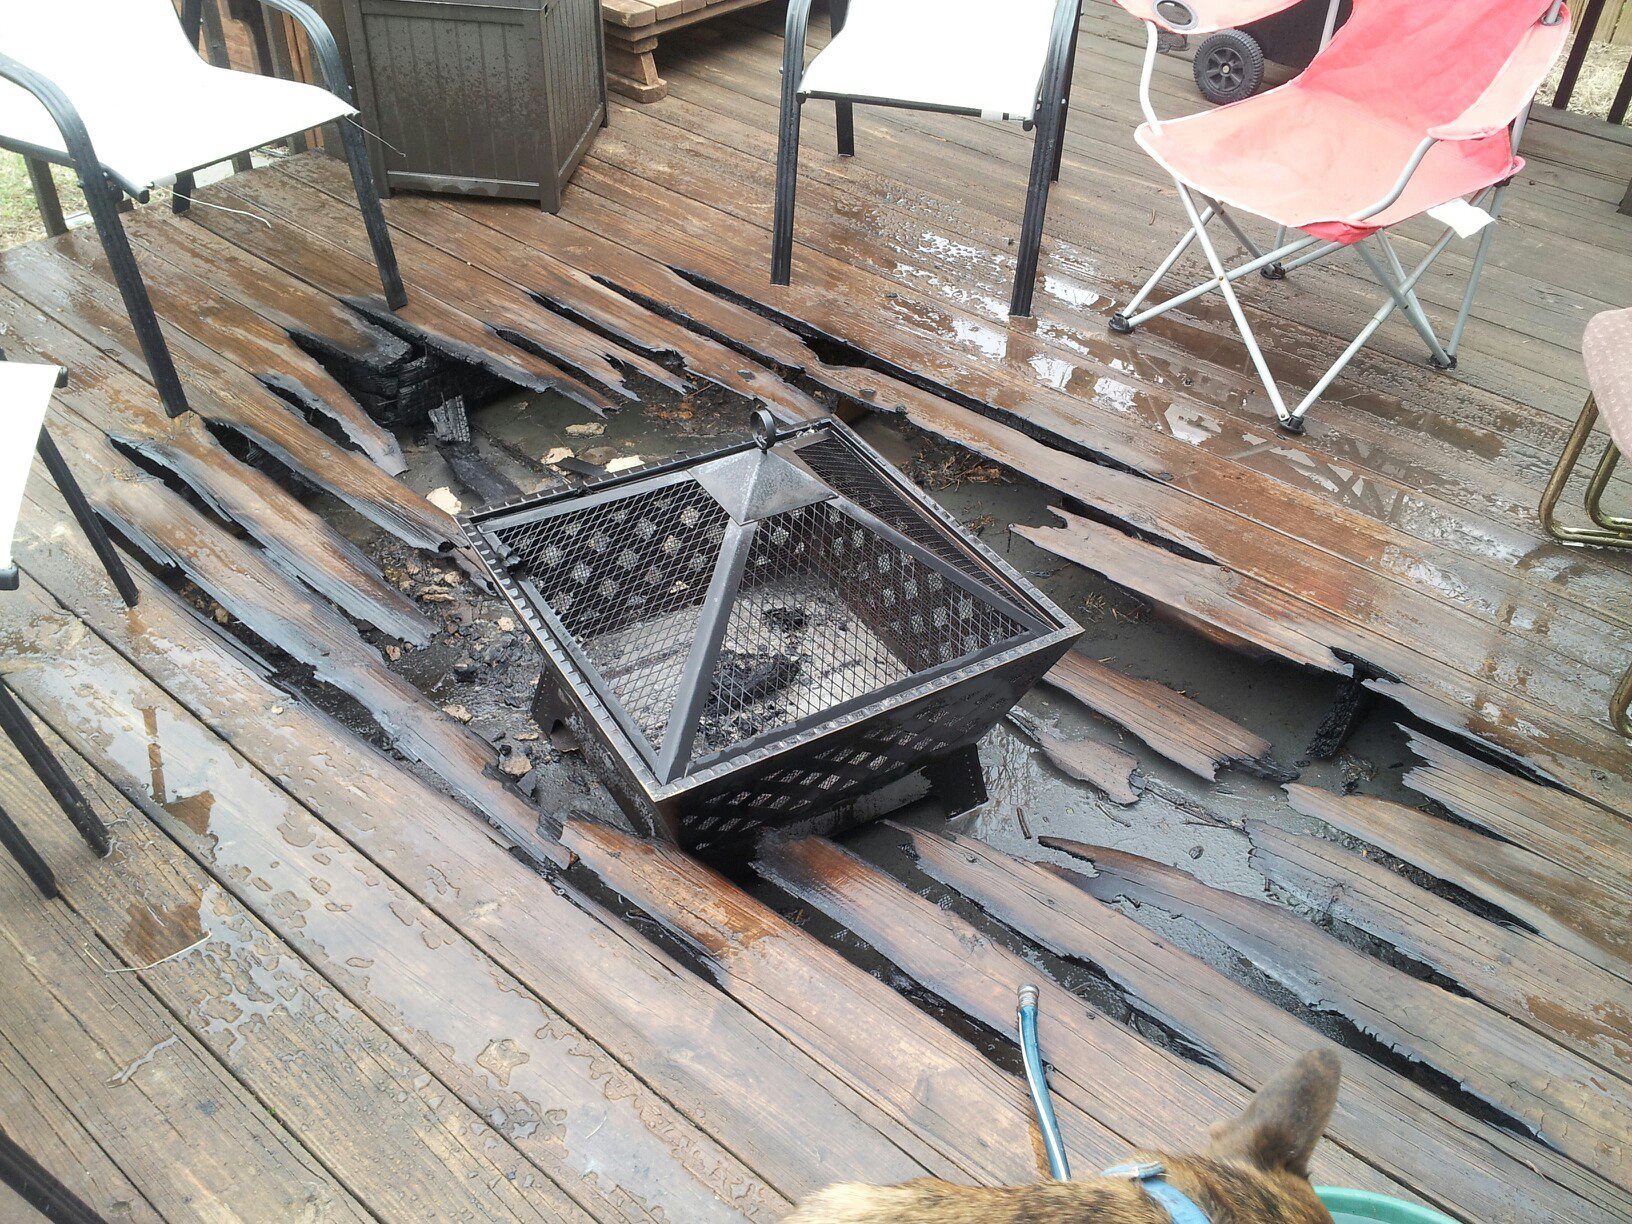 Ill Just Put This Fire Pit On A Wooden Floor Wcgw X Post From R within sizing 1632 X 1224